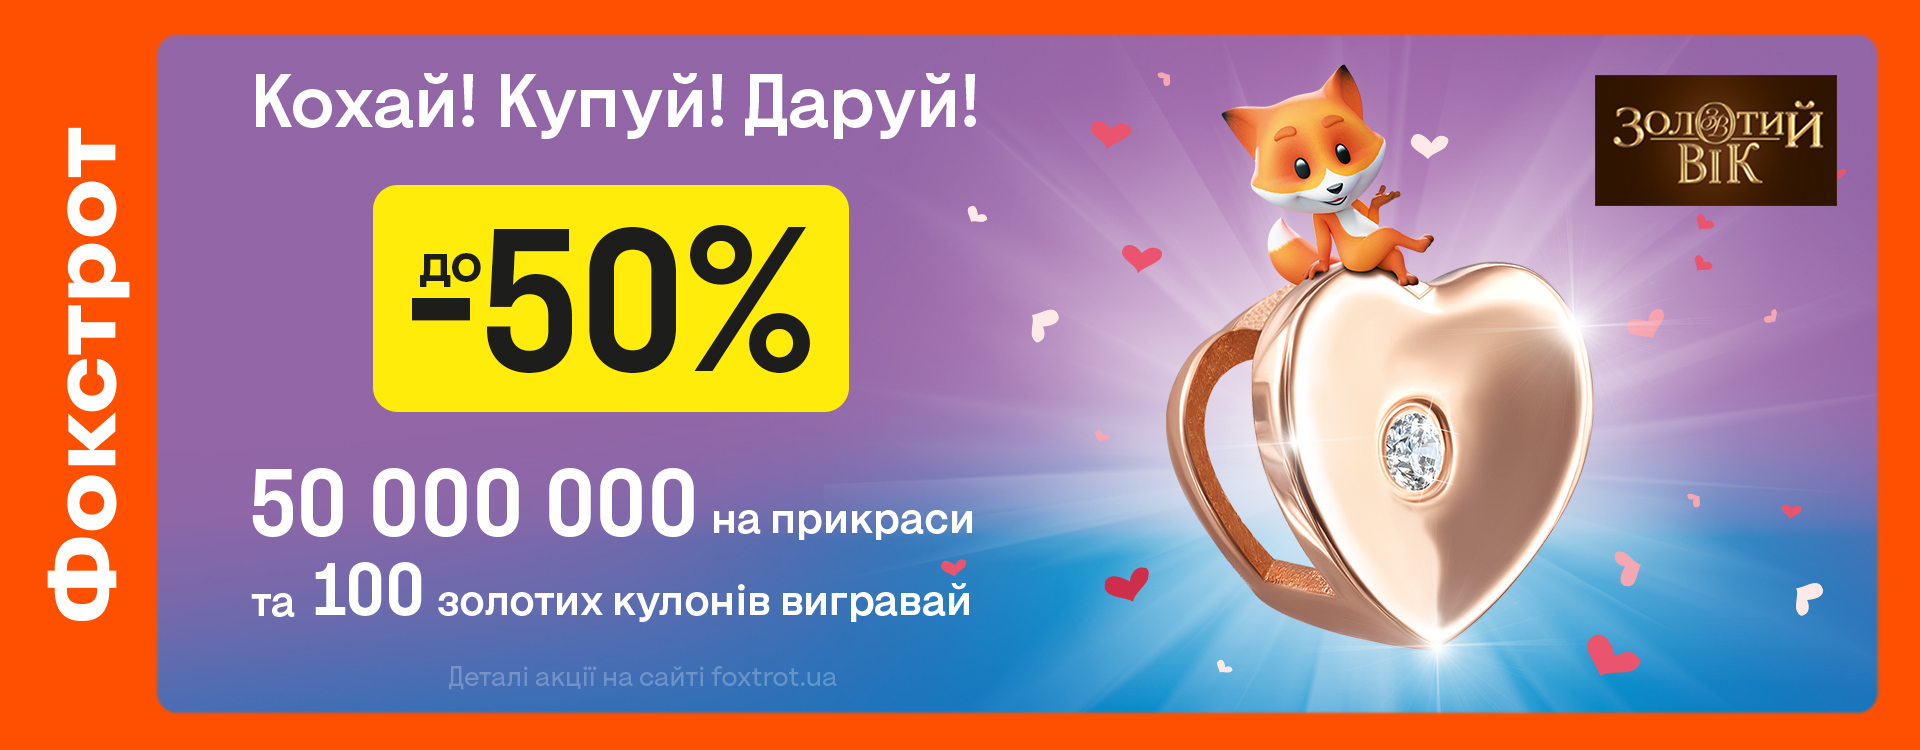 Discounts up to -50% in Foxtrot